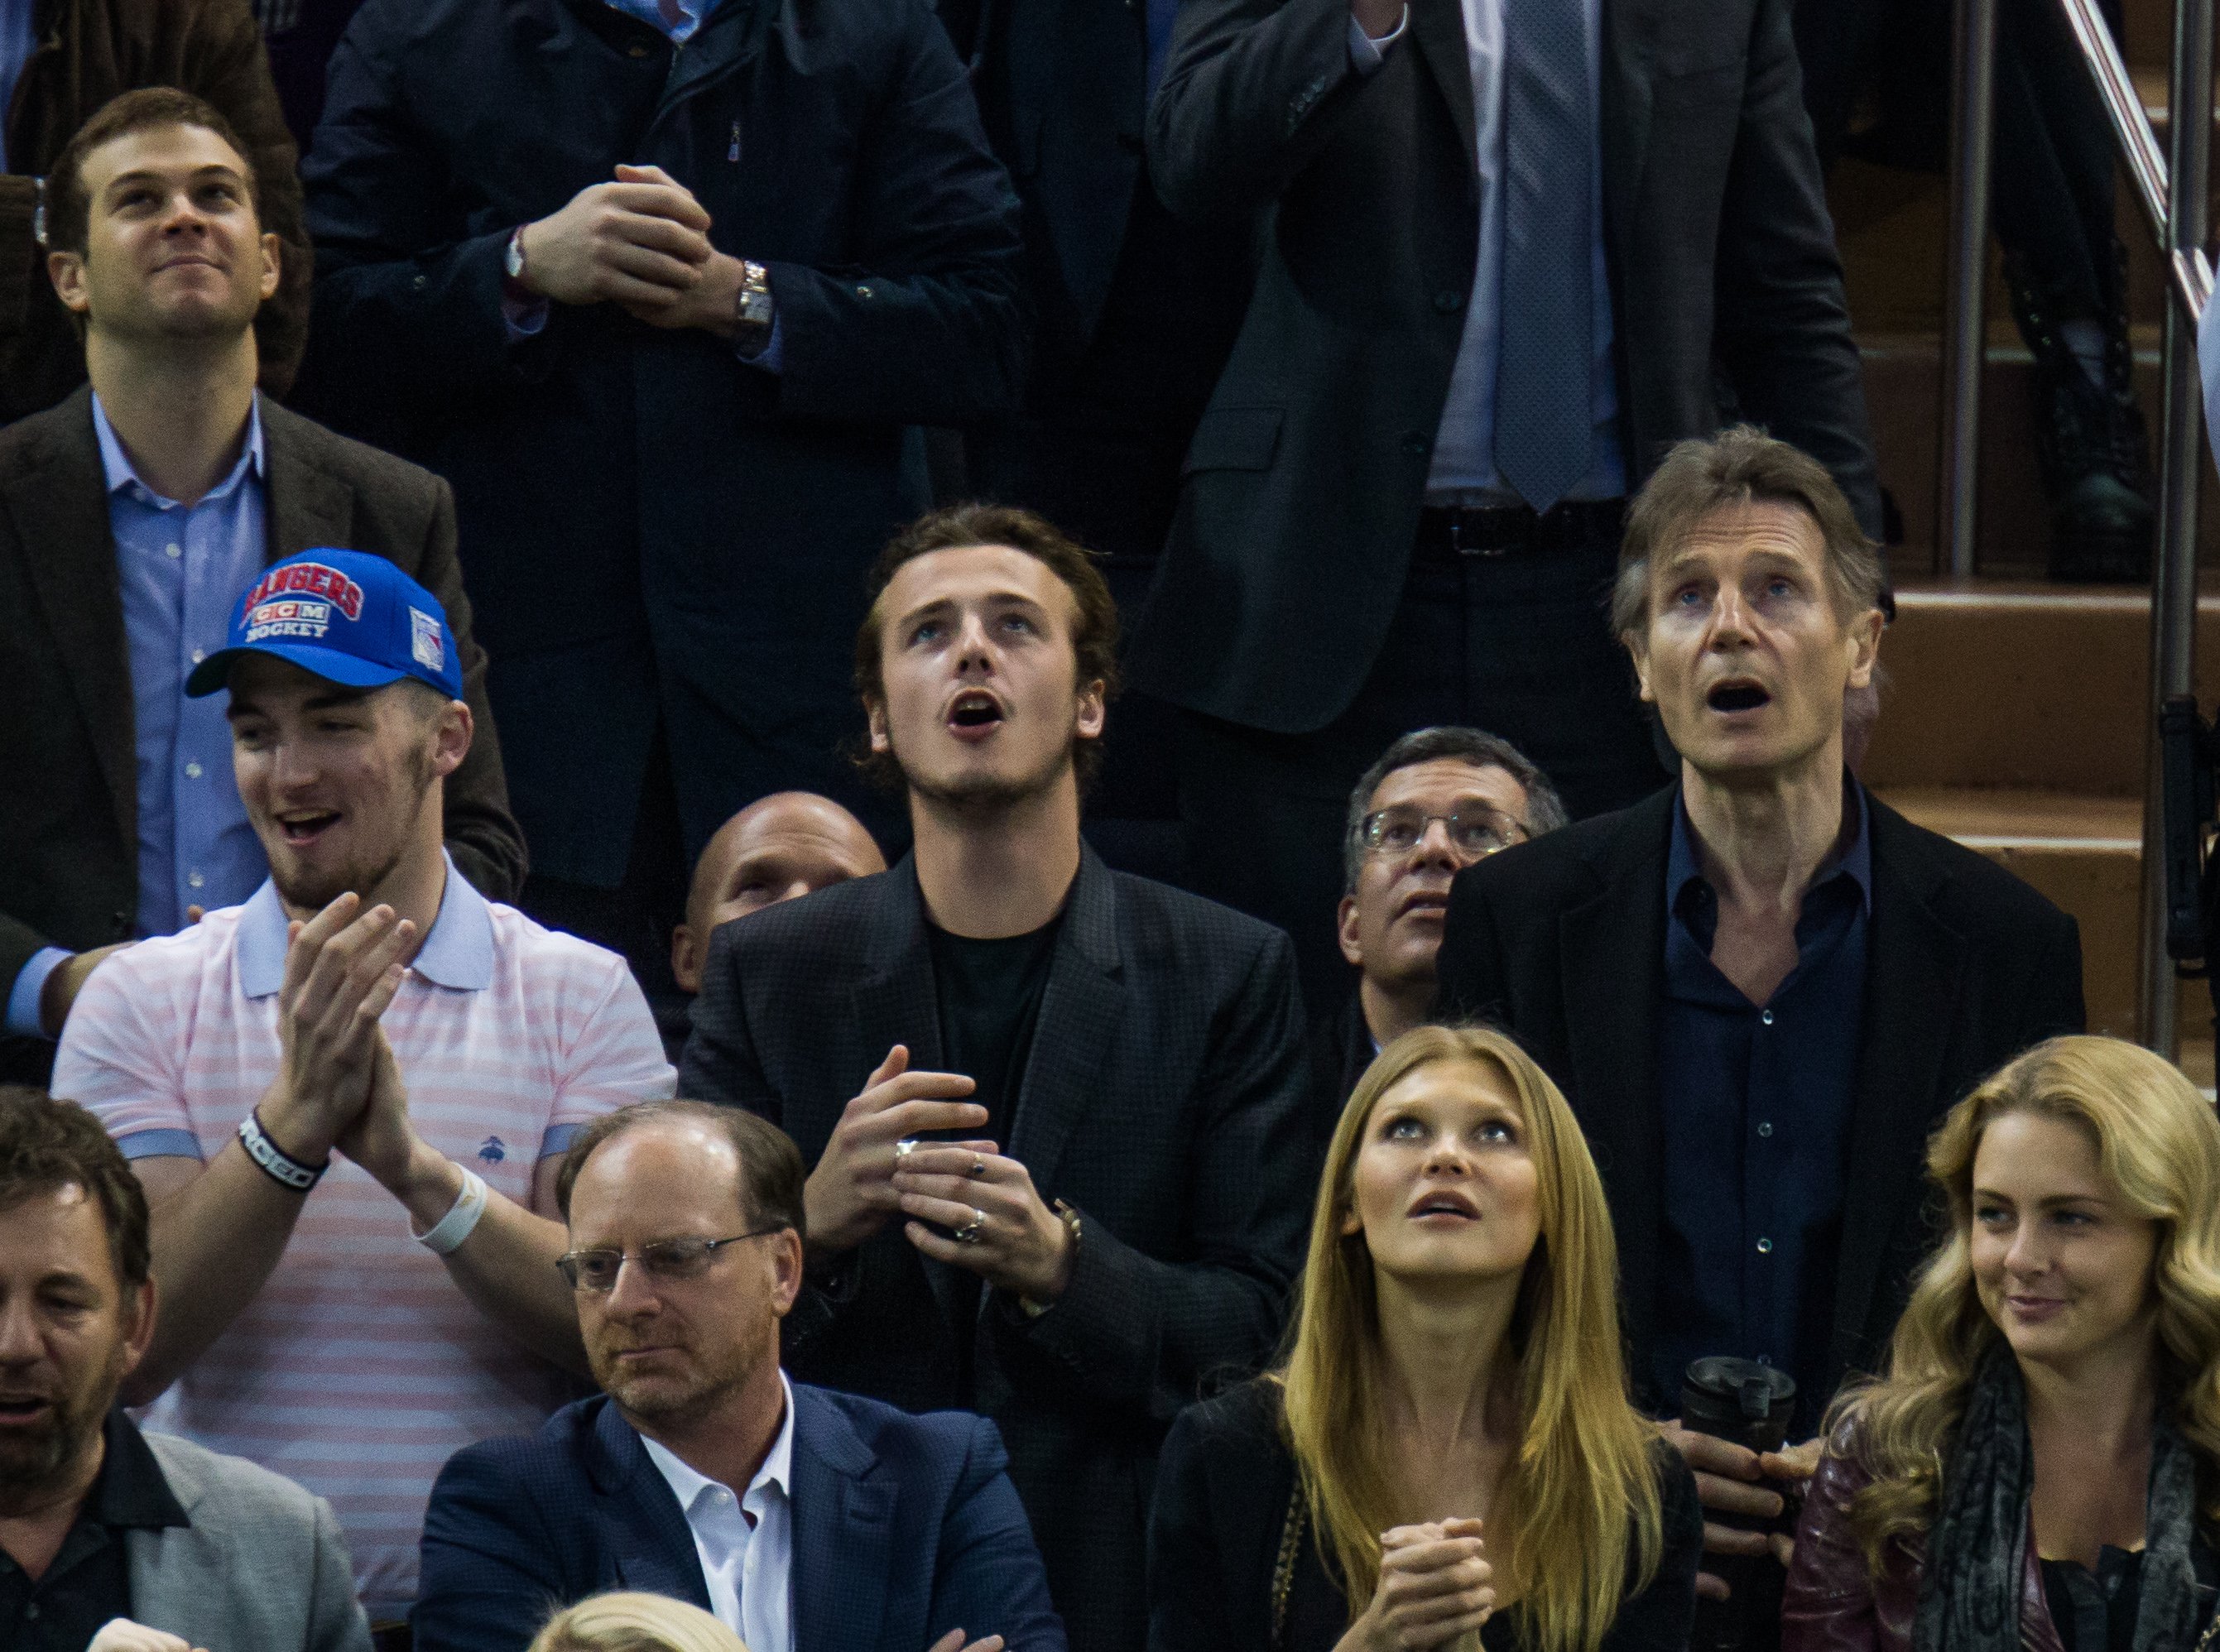 Liam Neeson and his sons Daniel Neeson, and Micheal Neeson attend New York Rangers Vs. Boston Bruins game at Madison Square Garden on March 23, 2016. | Source: Getty Images